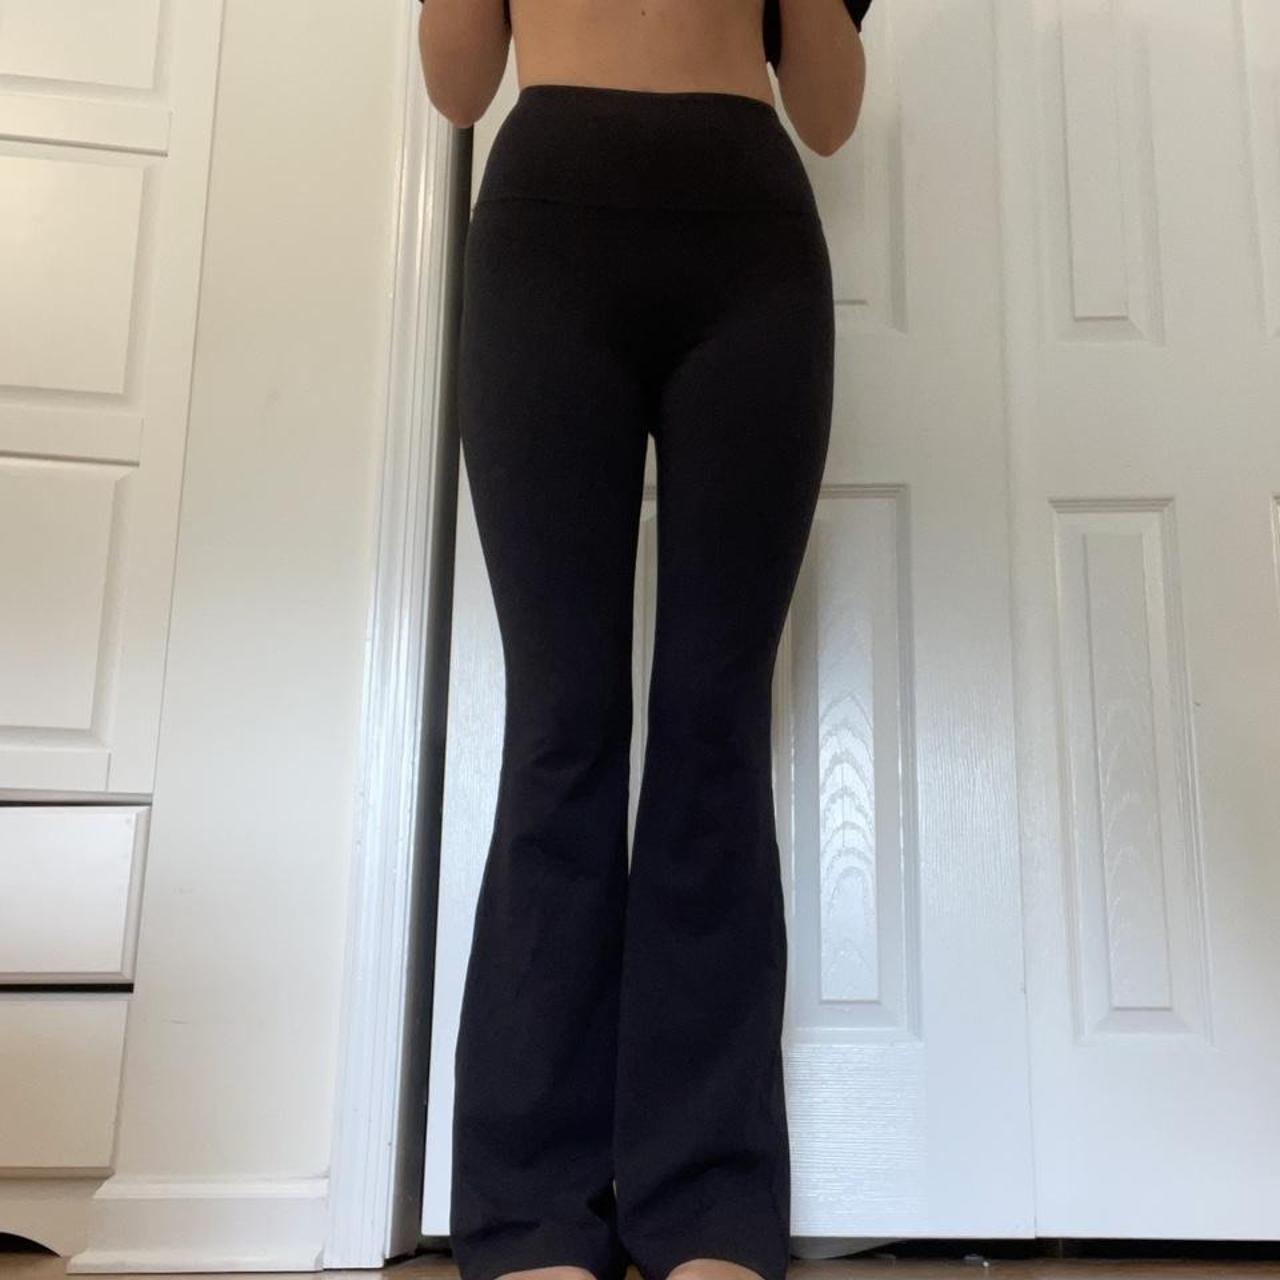 Lululemon Groove Flared Yoga Pant, Worn once- in